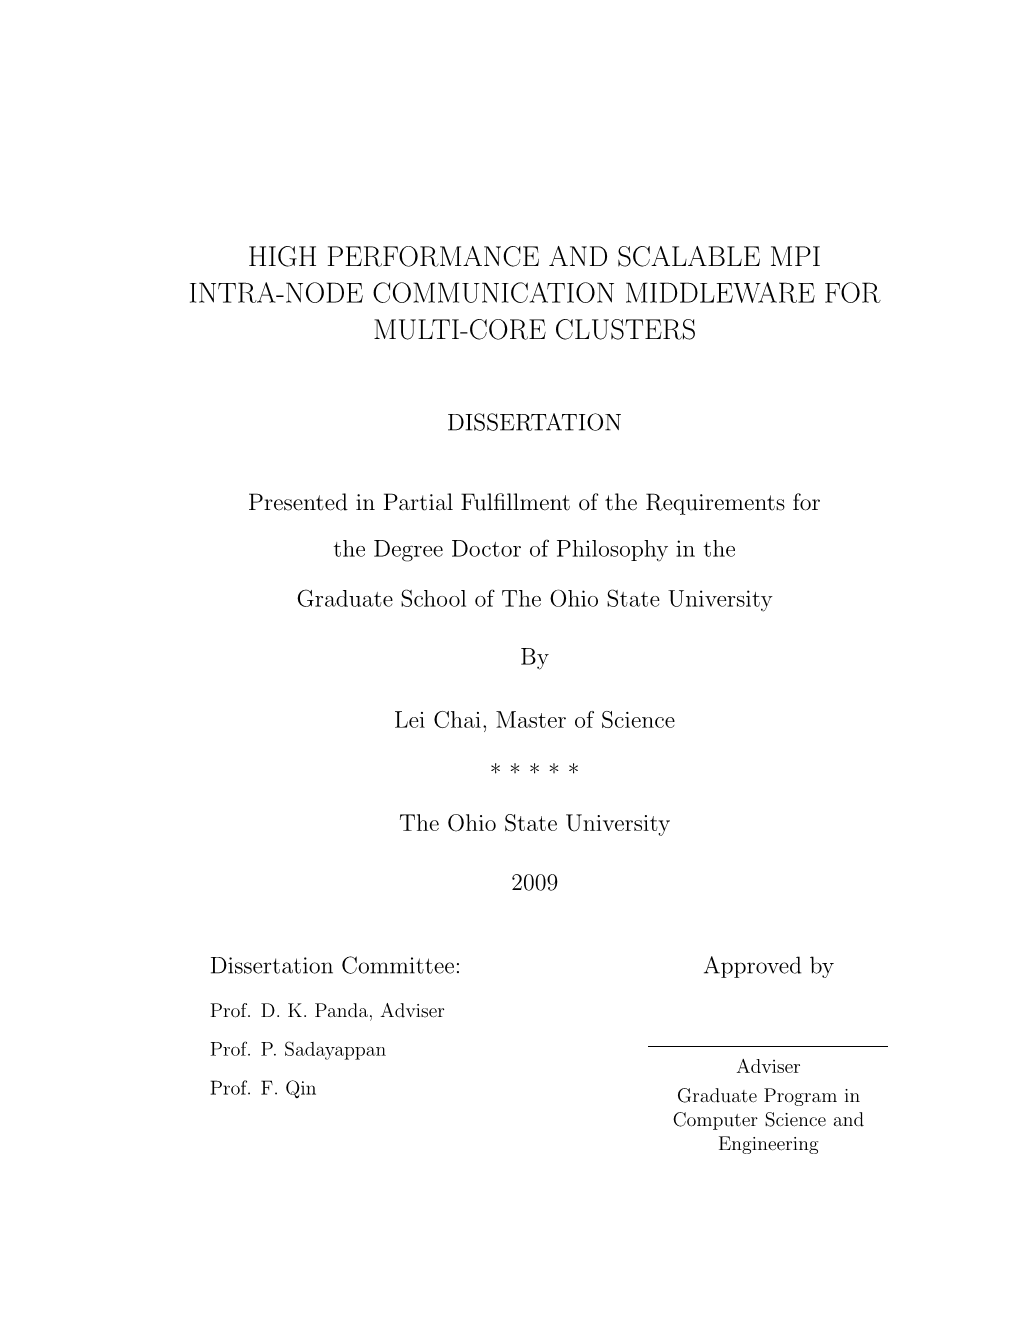 High Performance and Scalable Mpi Intra-Node Communication Middleware for Multi-Core Clusters